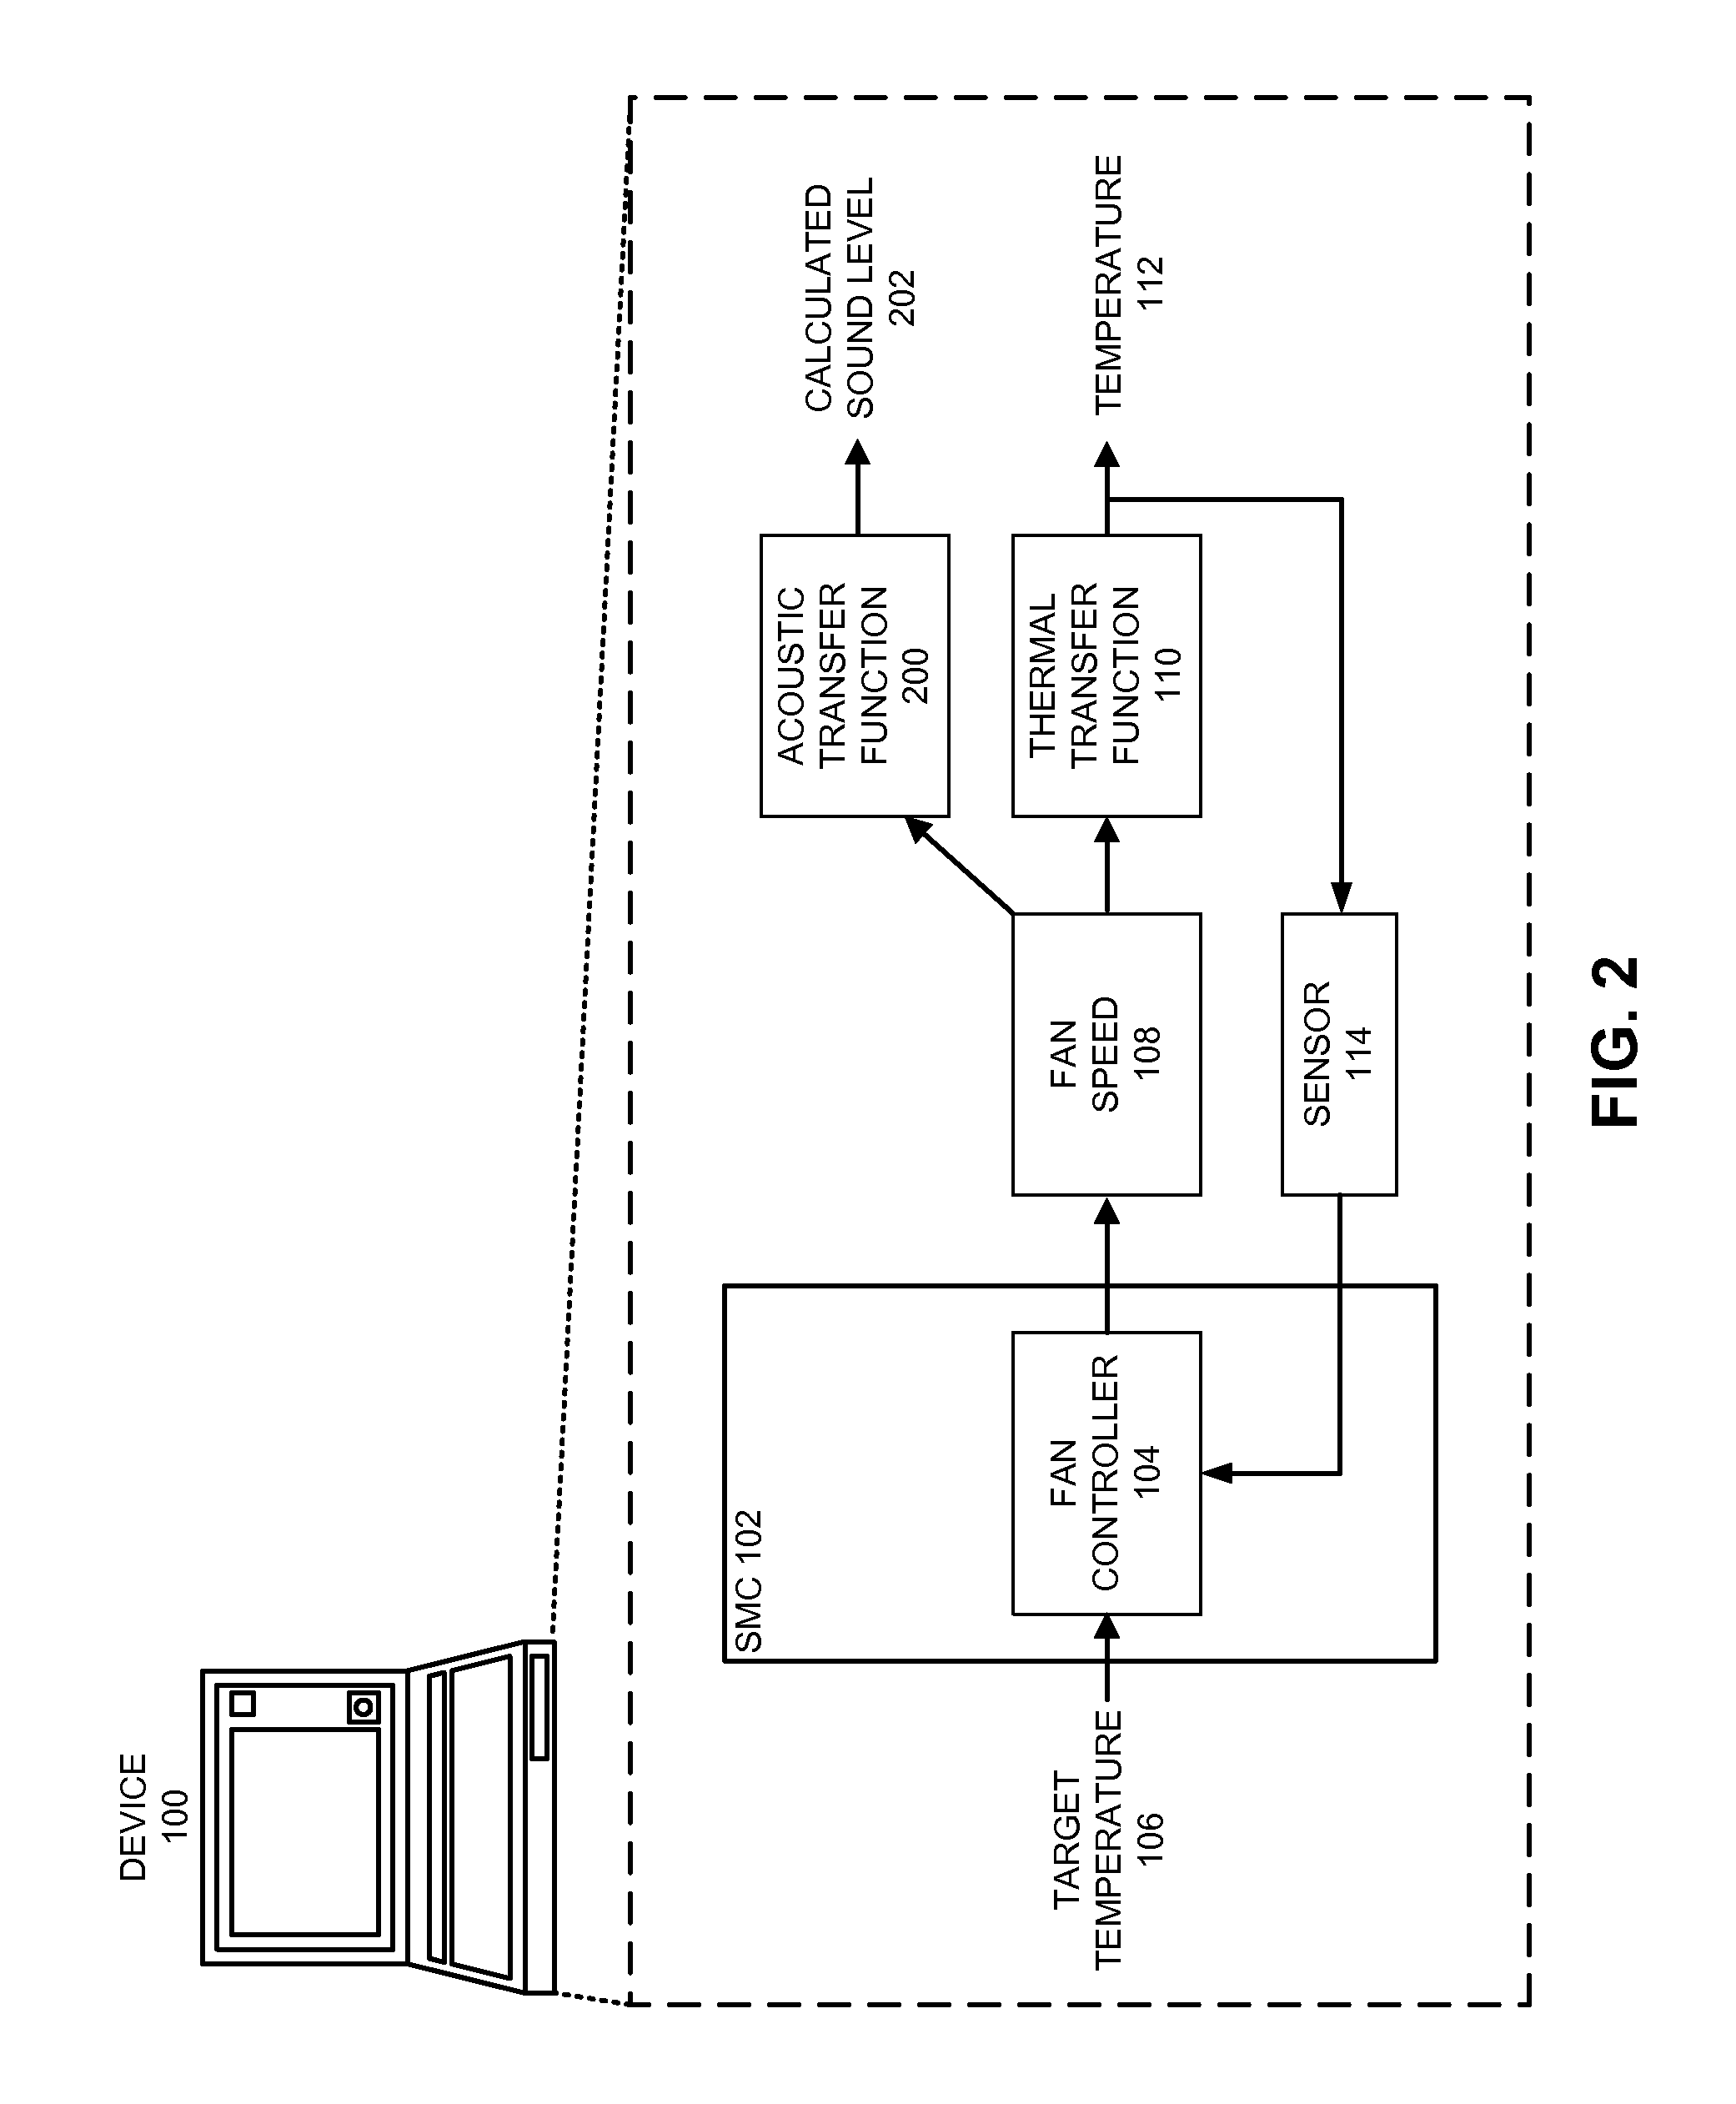 Managing acoustic noise produced by a device